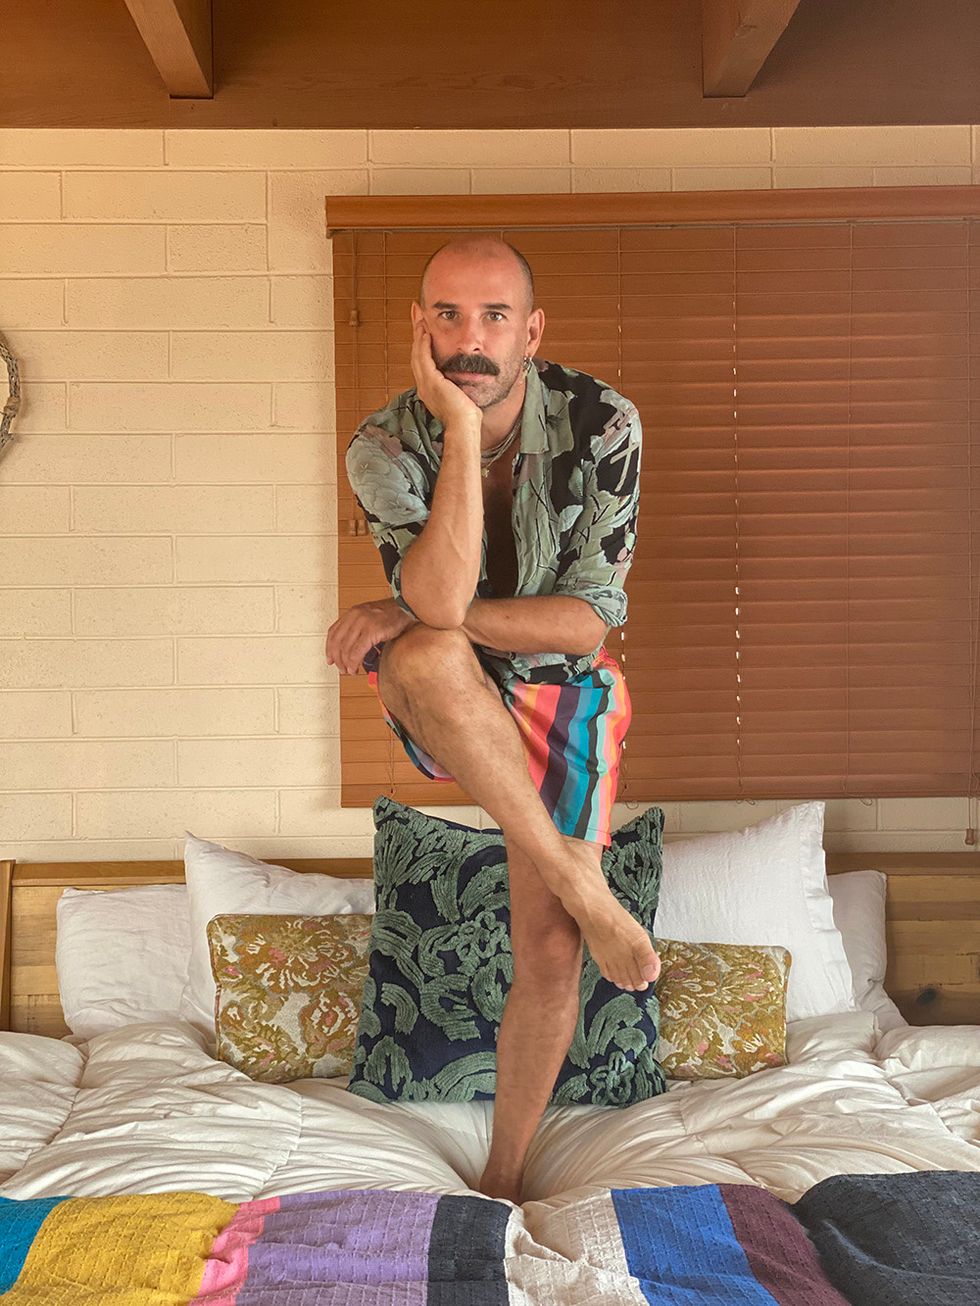 Heffington squats on his bed, wearing colorful striped shorts and a blue and green button down. He has colorful blankets and pillows on his bed